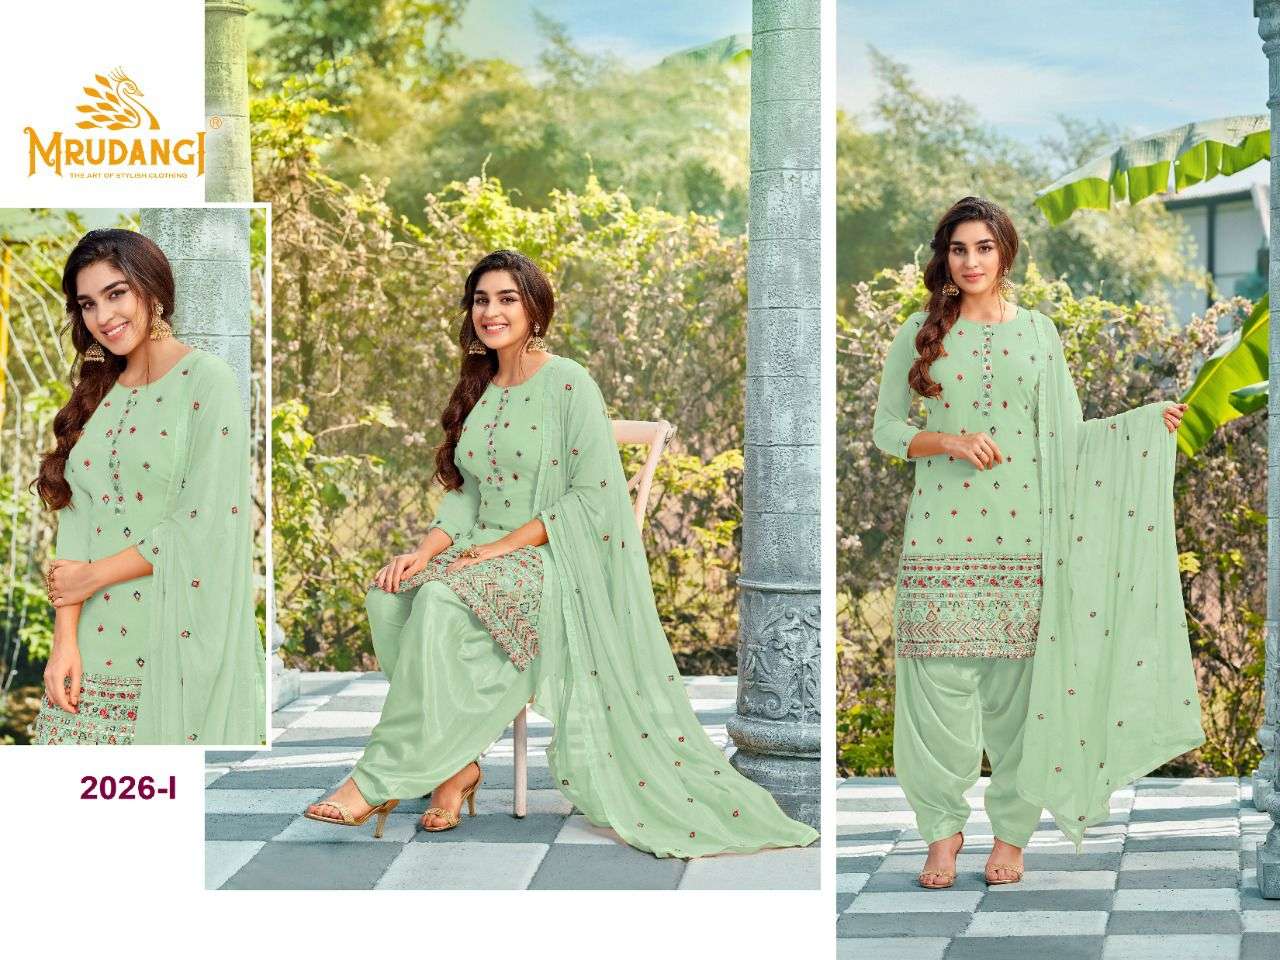 SAHELI COLOUR EDITION BY MRUDANGI 2026-F TO 2026-K SERIES BEAUTIFUL SUITS COLORFUL STYLISH FANCY CASUAL WEAR & ETHNIC WEAR FAUX GEORGETTE DRESSES AT WHOLESALE PRICE